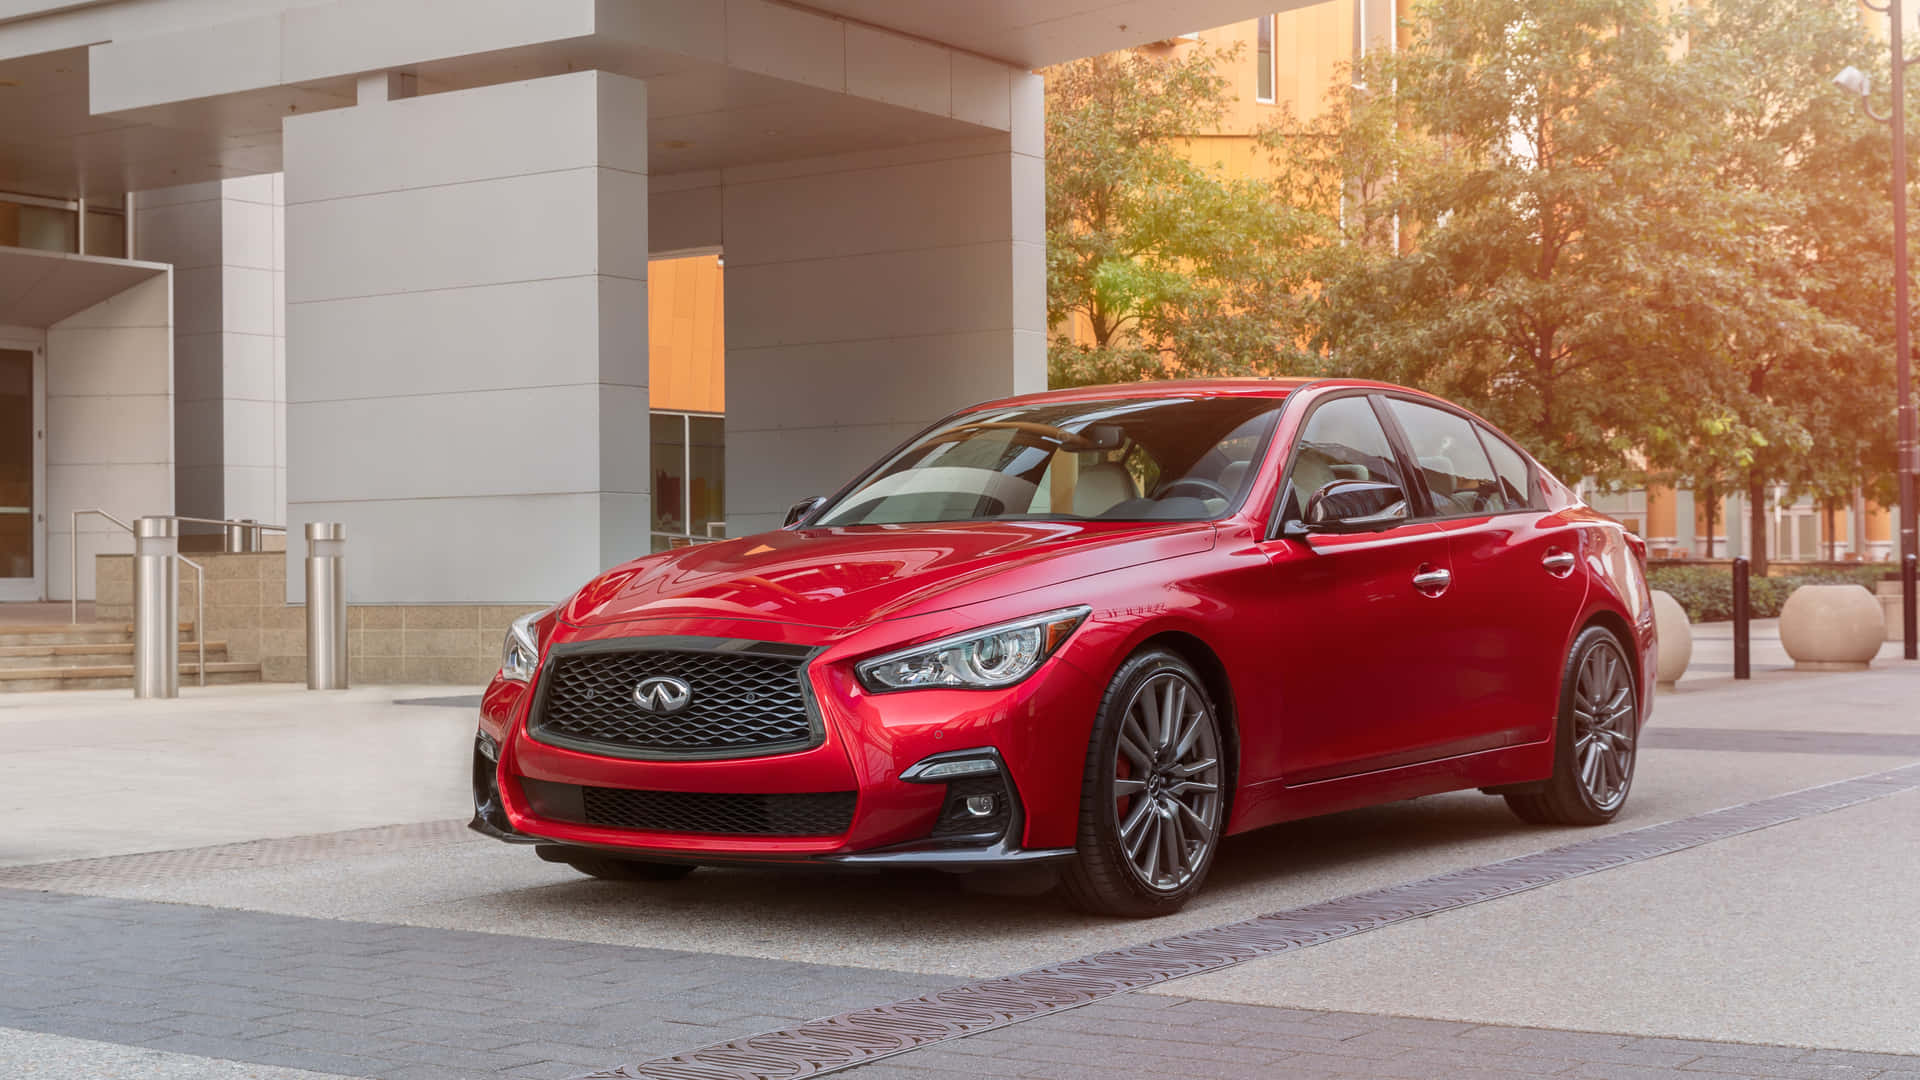 The Red 2019 Infiniti Q50 Is Parked In Front Of A Building Wallpaper